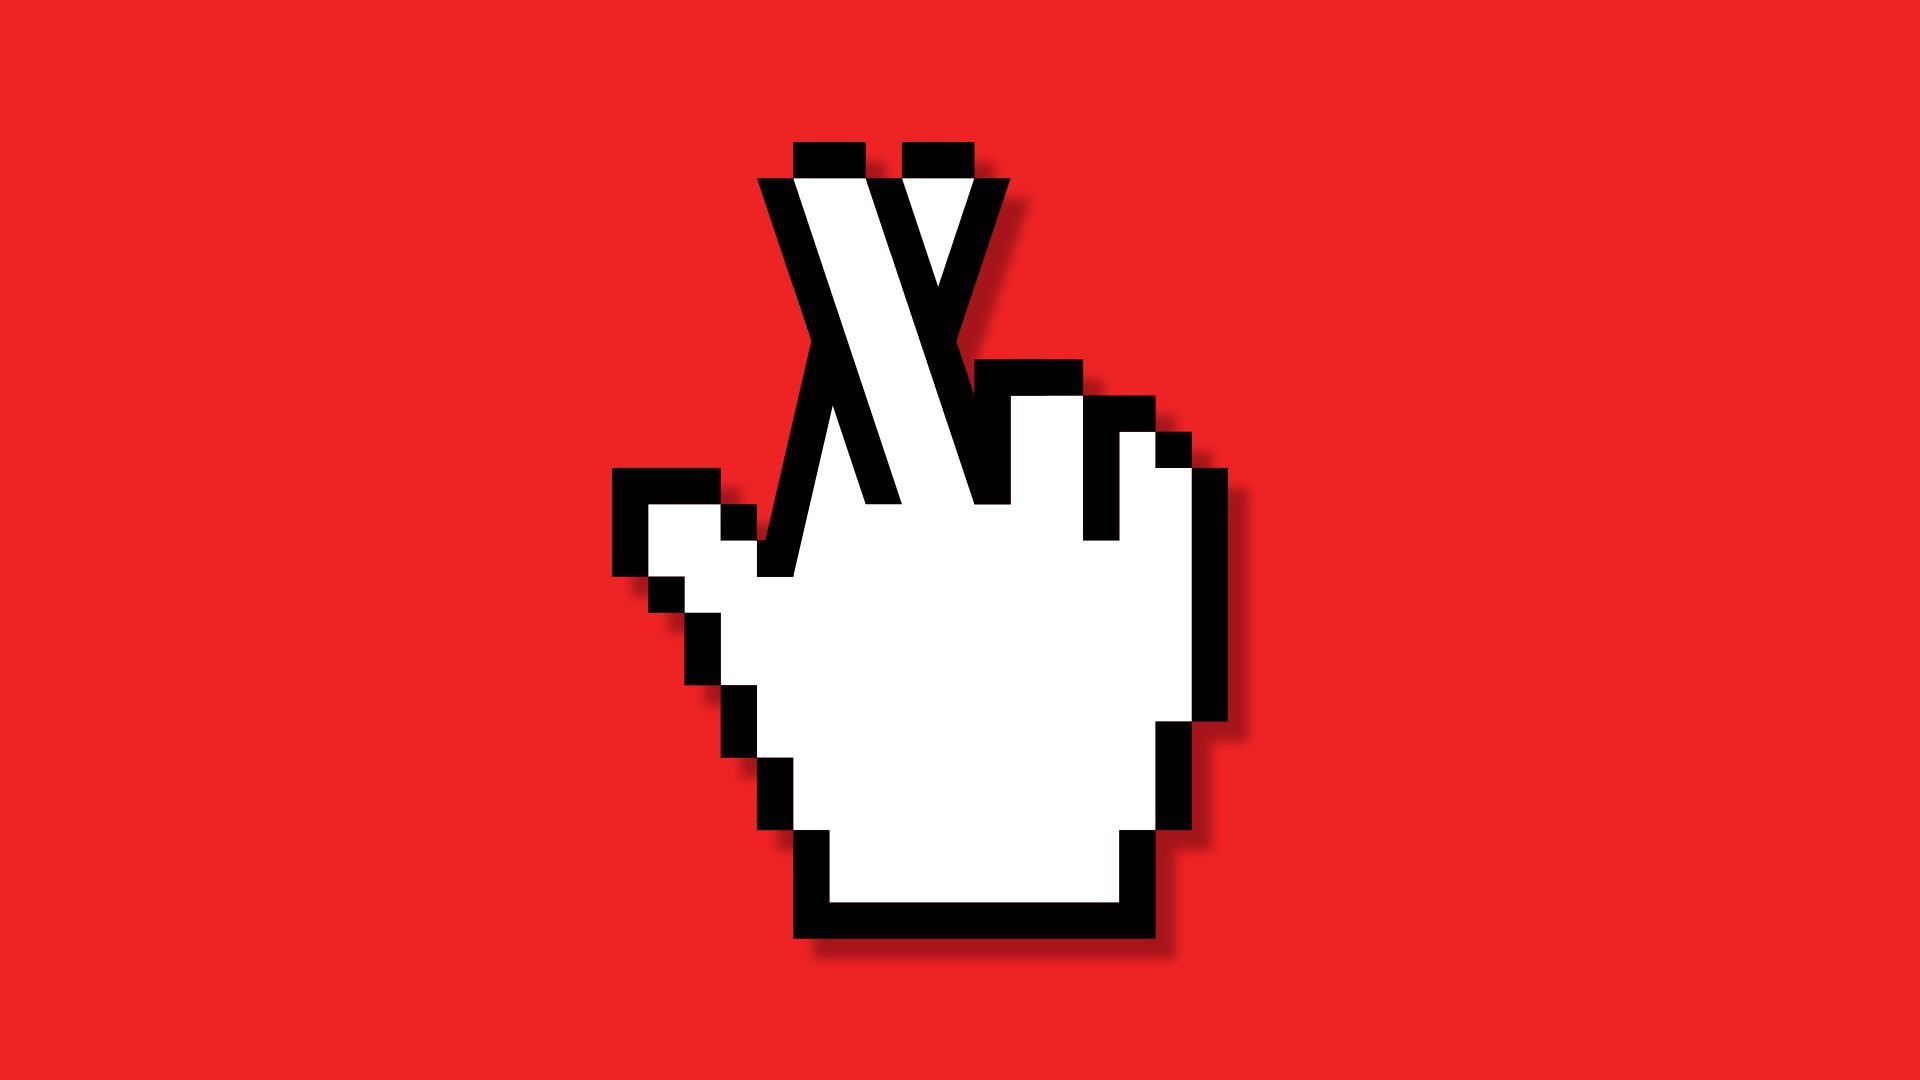 Illustration of a hand cursor with crossed fingers.  